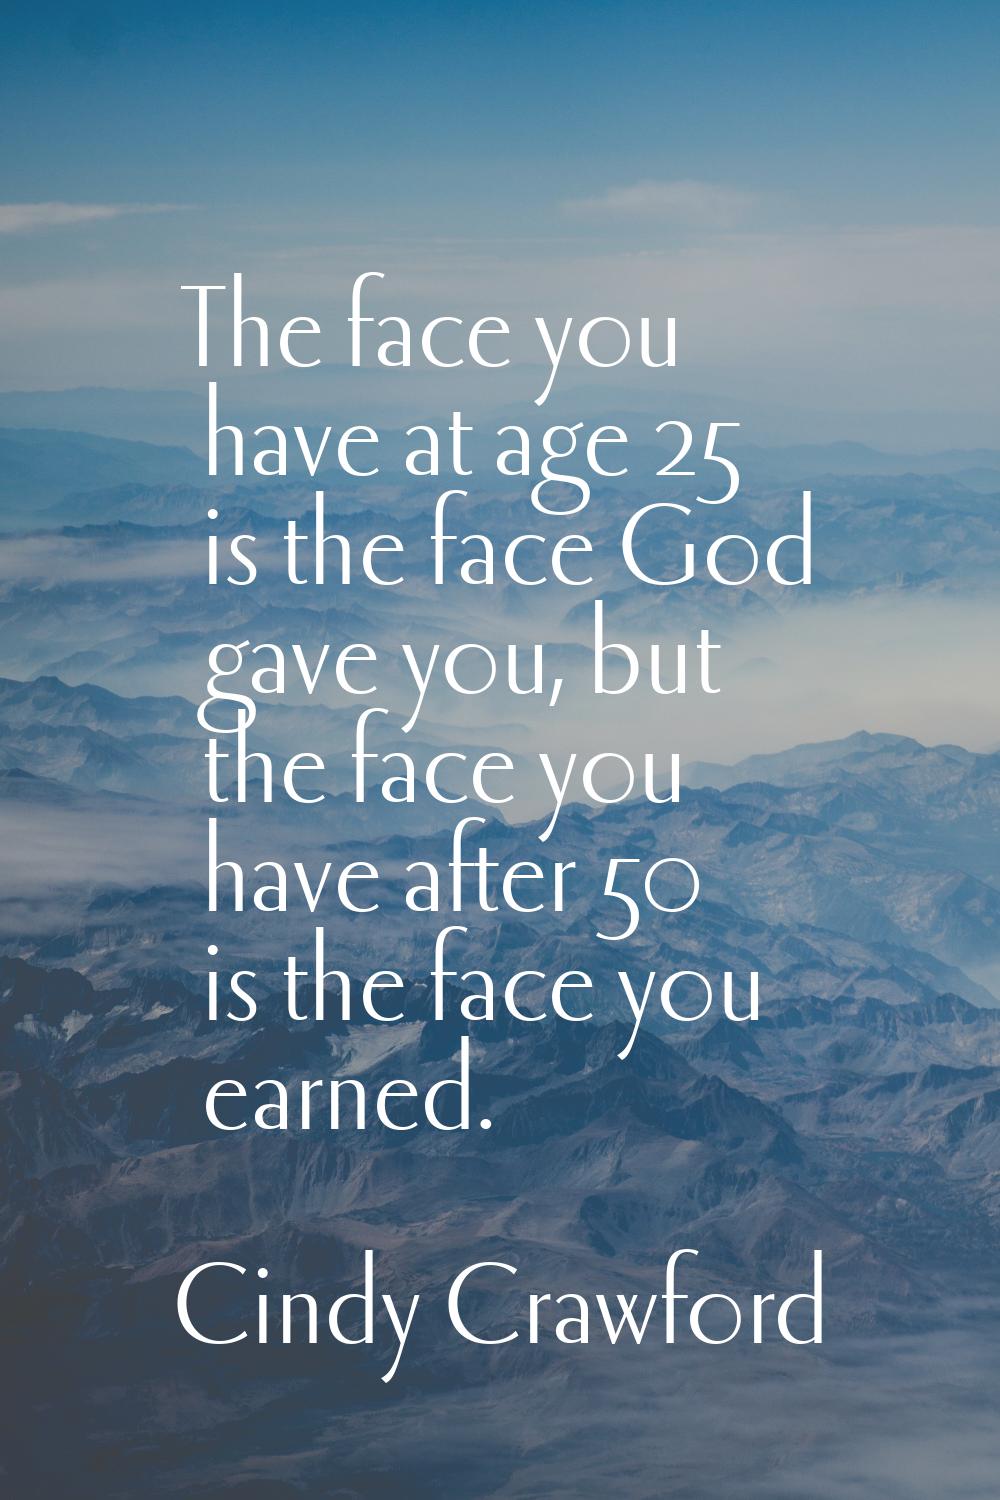 The face you have at age 25 is the face God gave you, but the face you have after 50 is the face yo